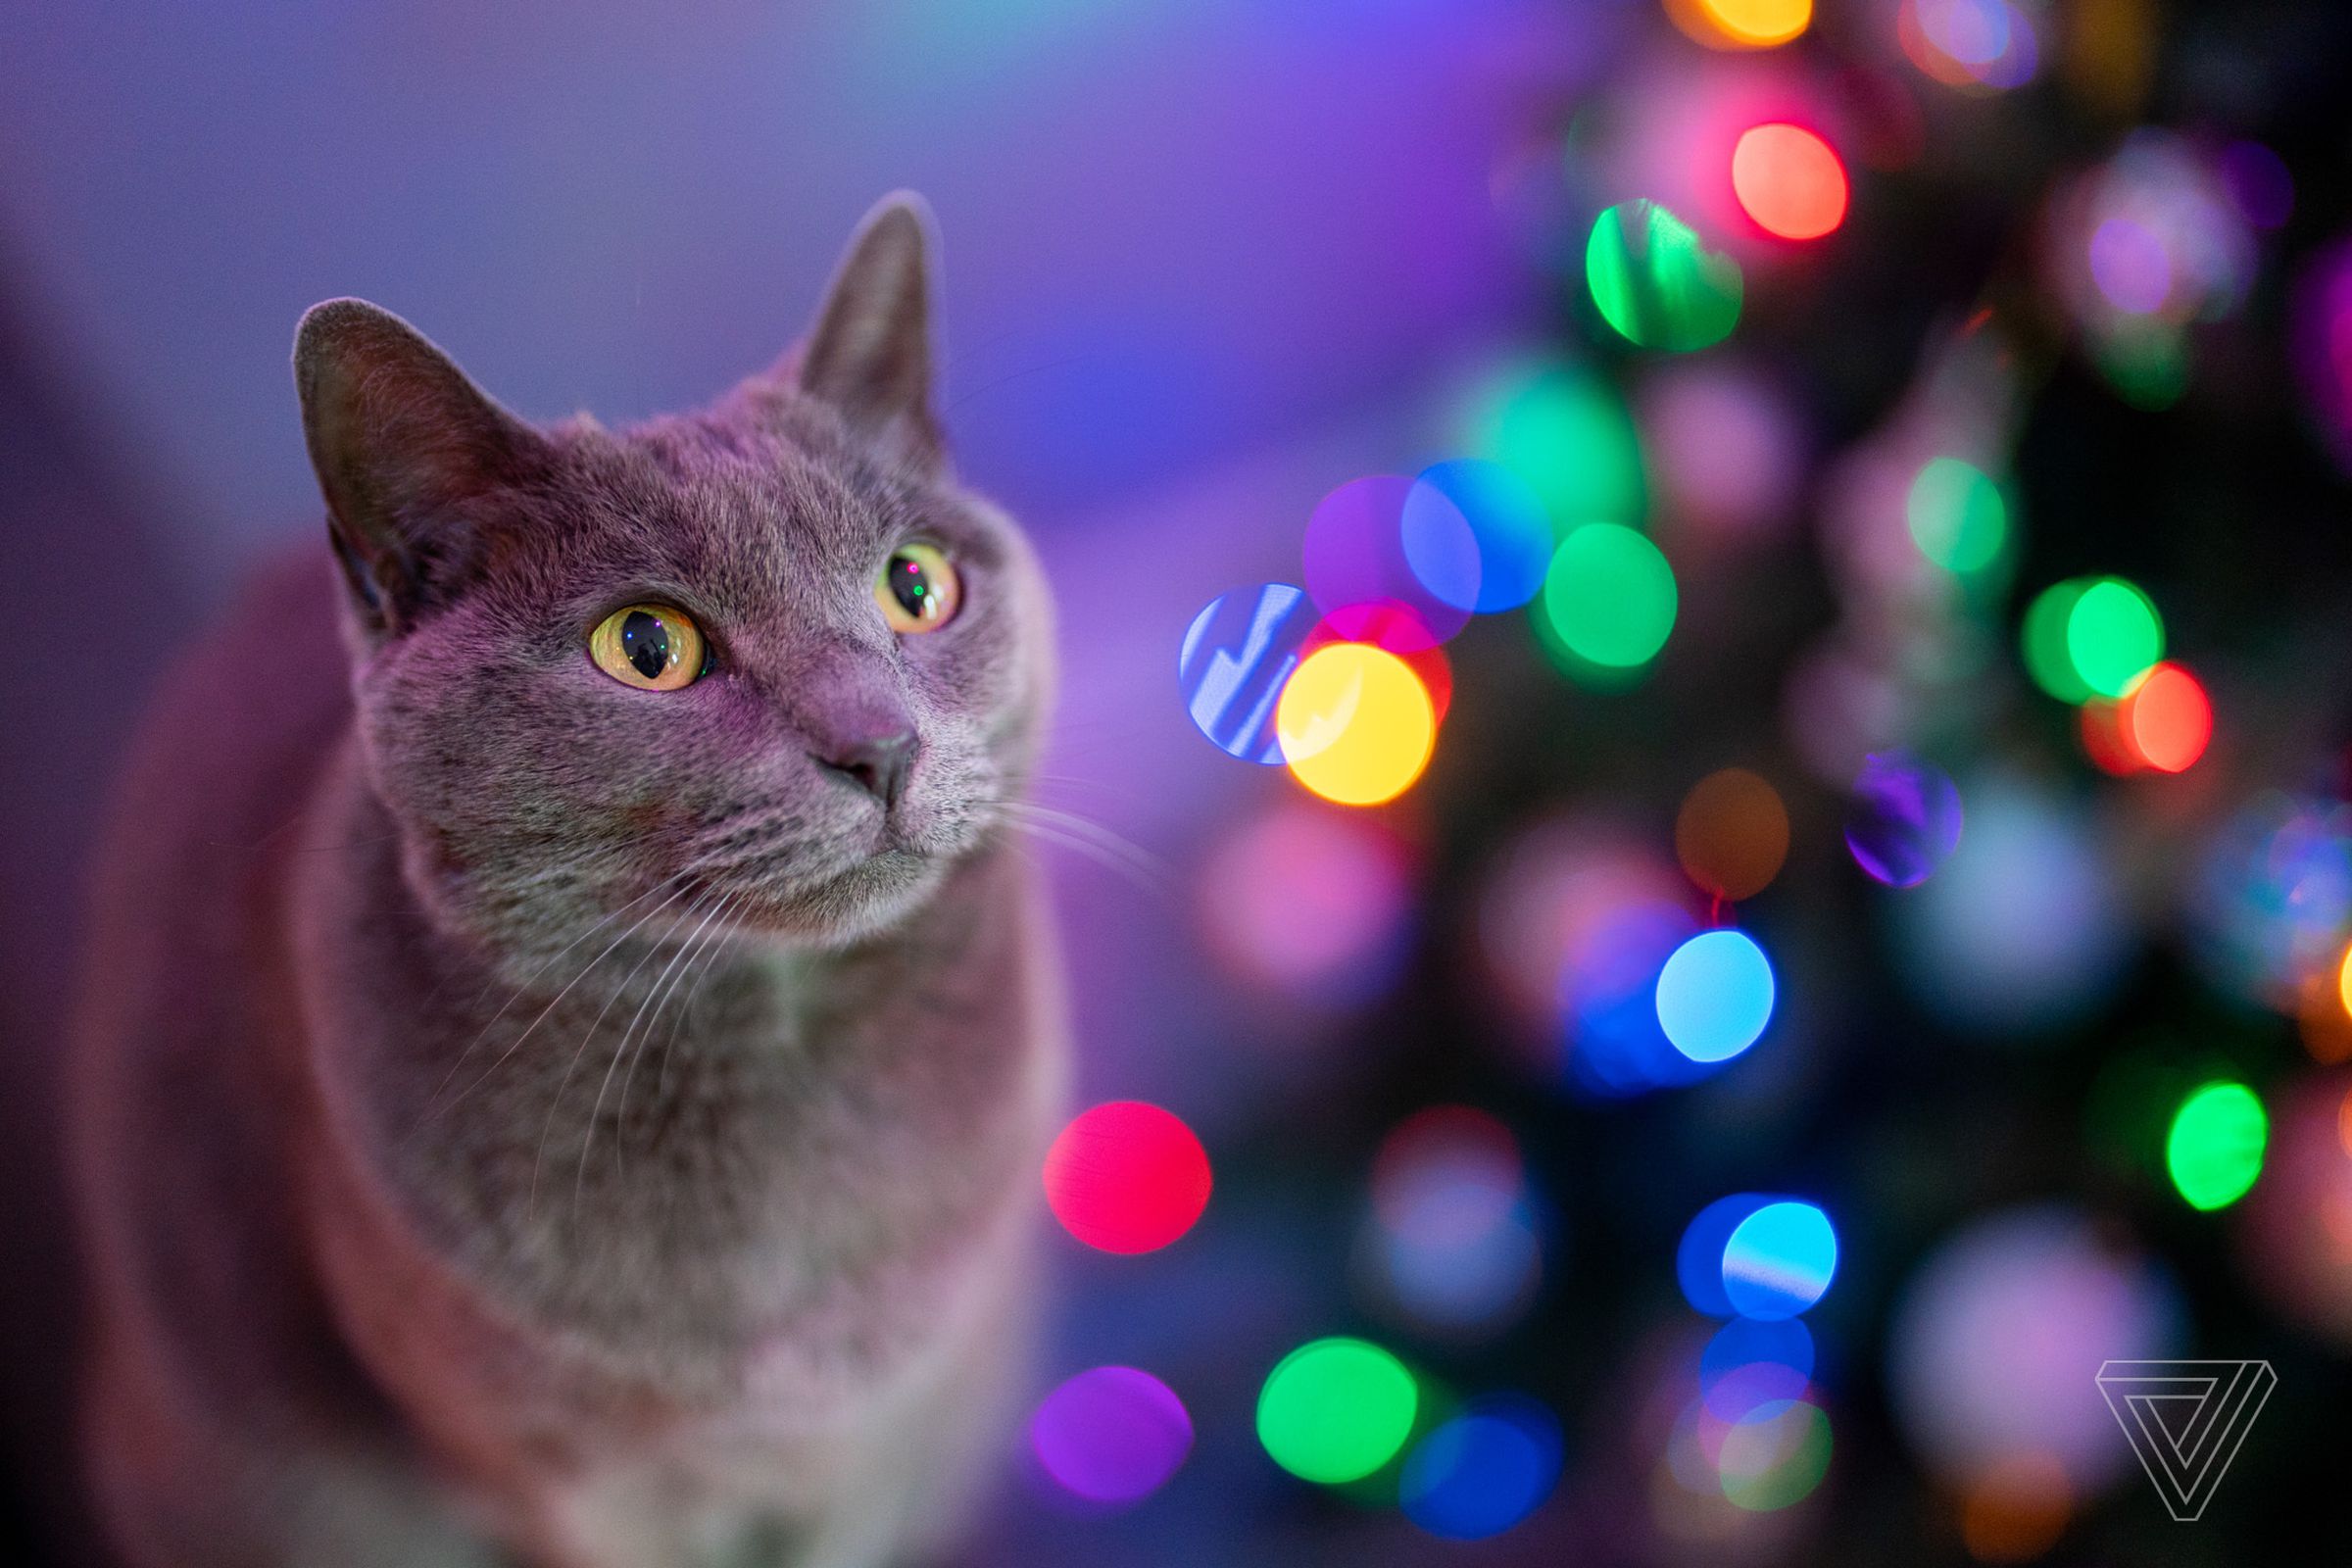 Cat in front of tree lights